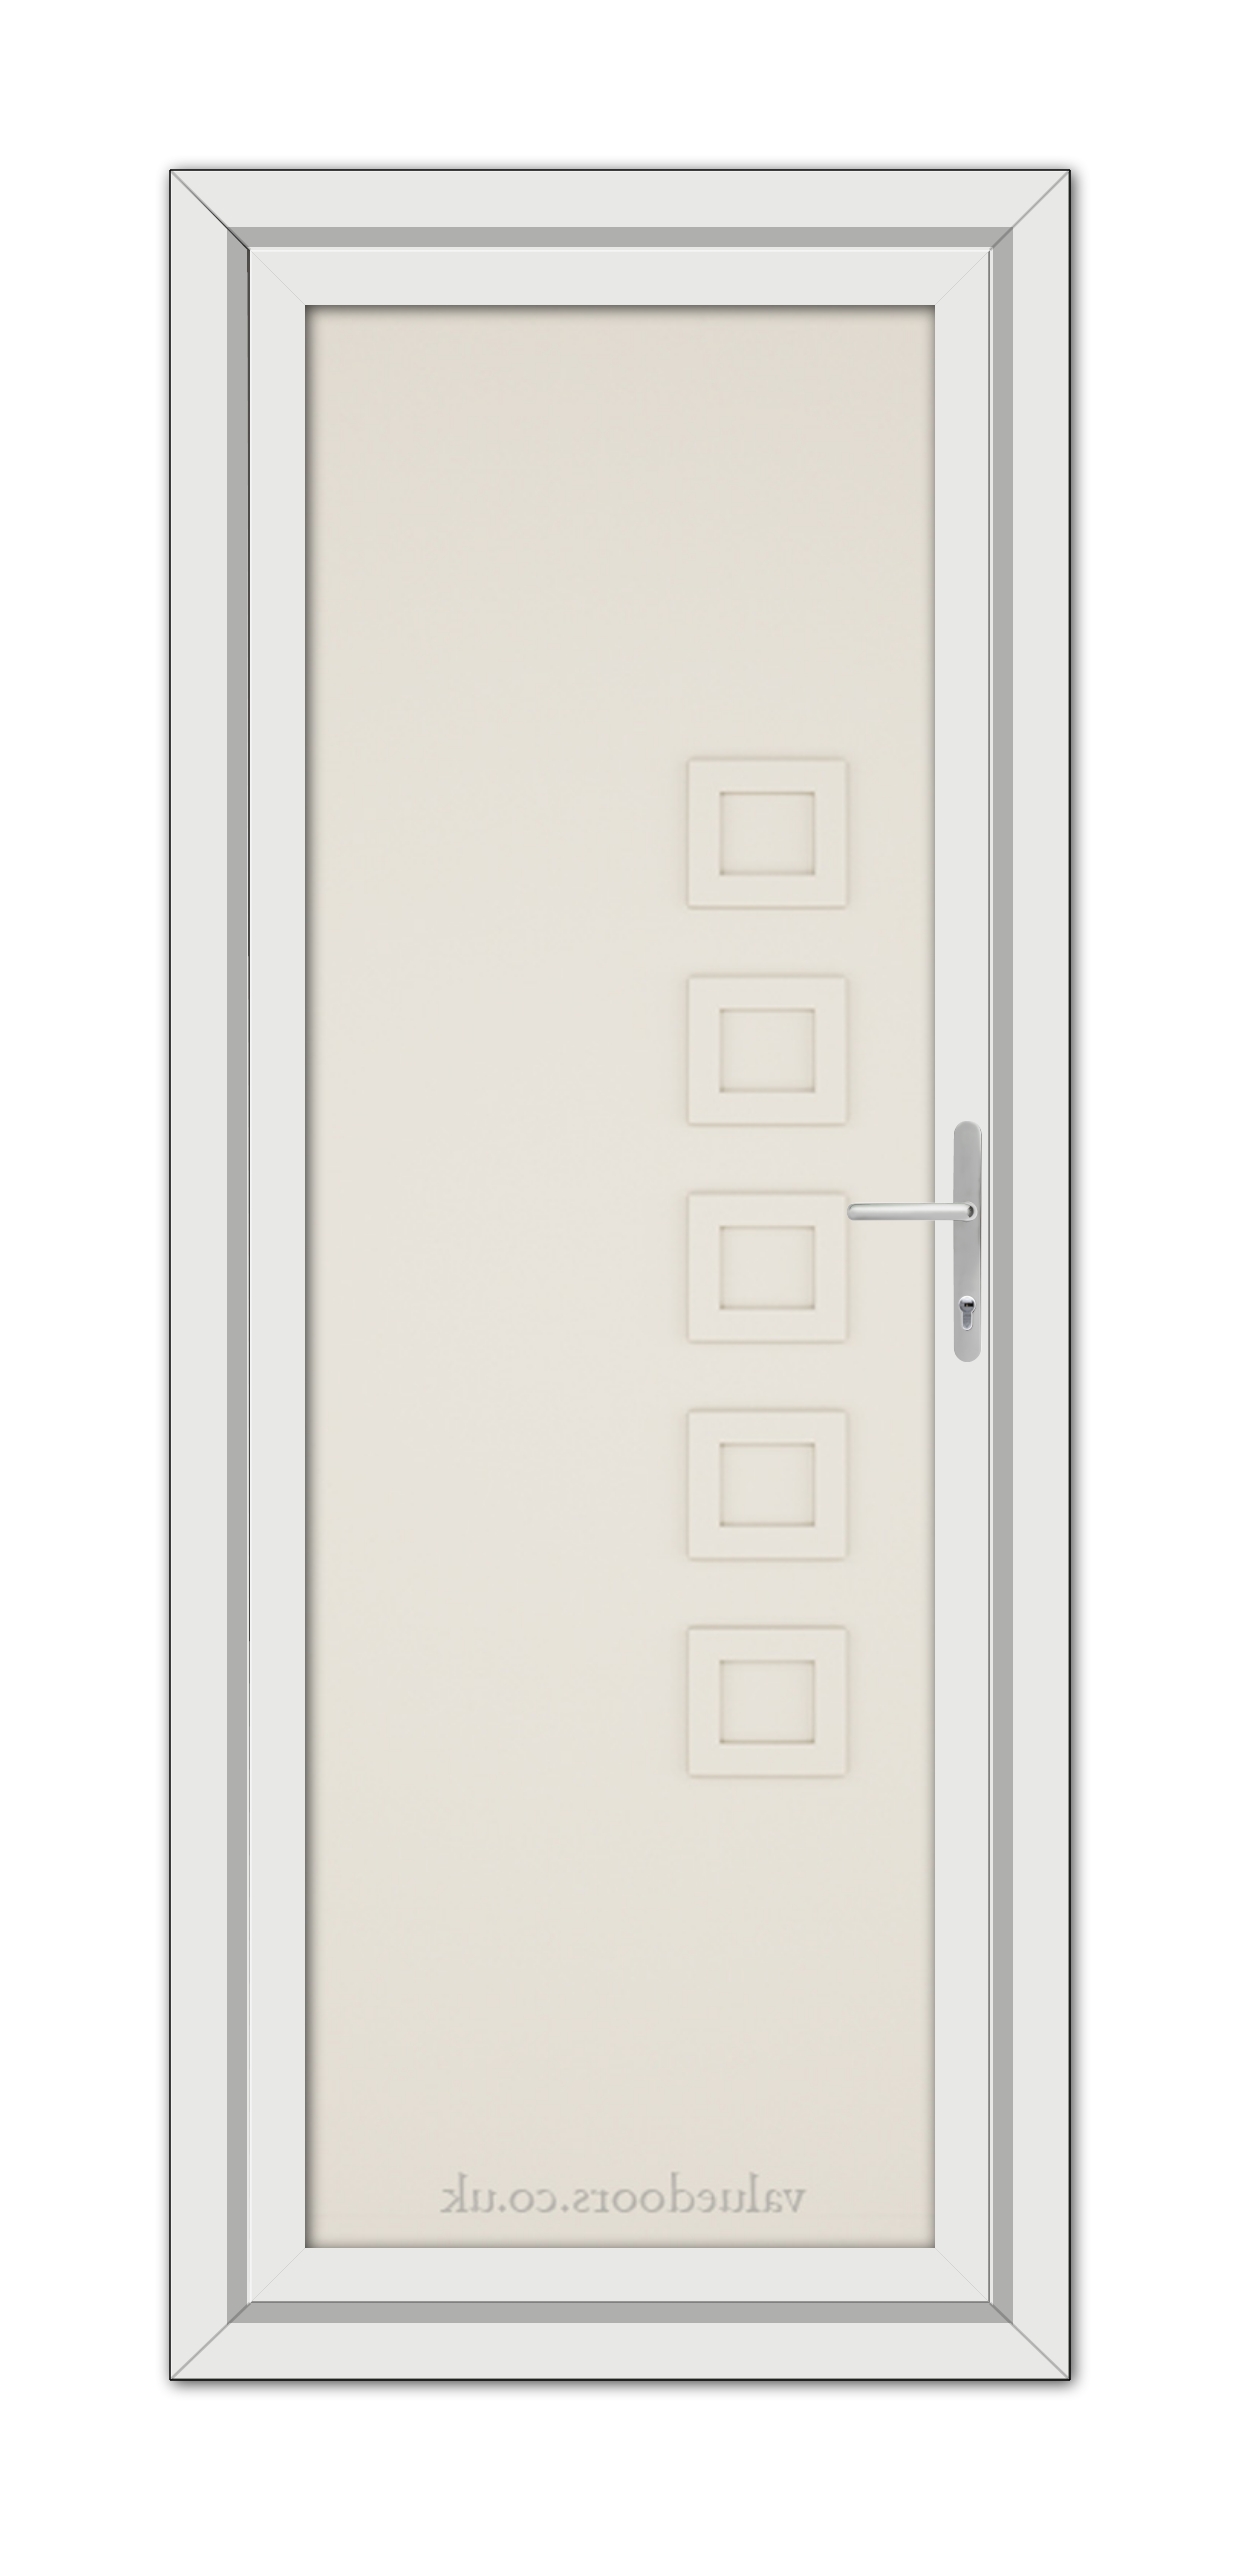 A vertical image of a Cream Malaga Solid uPVC Door with a handle on the right and five square windows aligned vertically down the center.